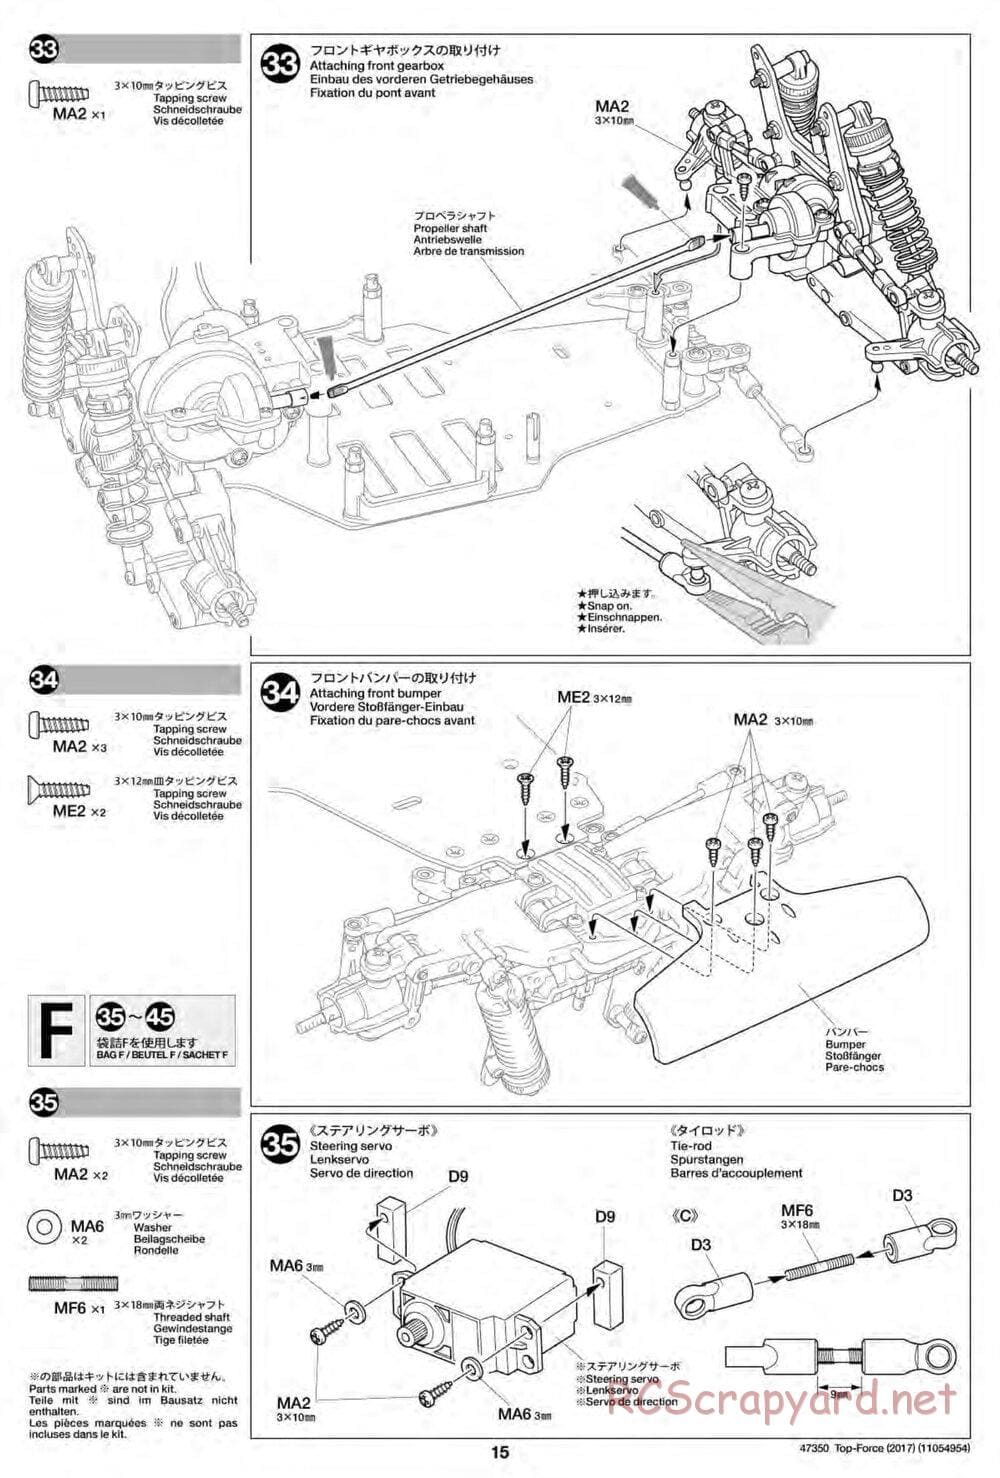 Tamiya - Top Force 2017 - DF-01 Chassis - Manual - Page 15